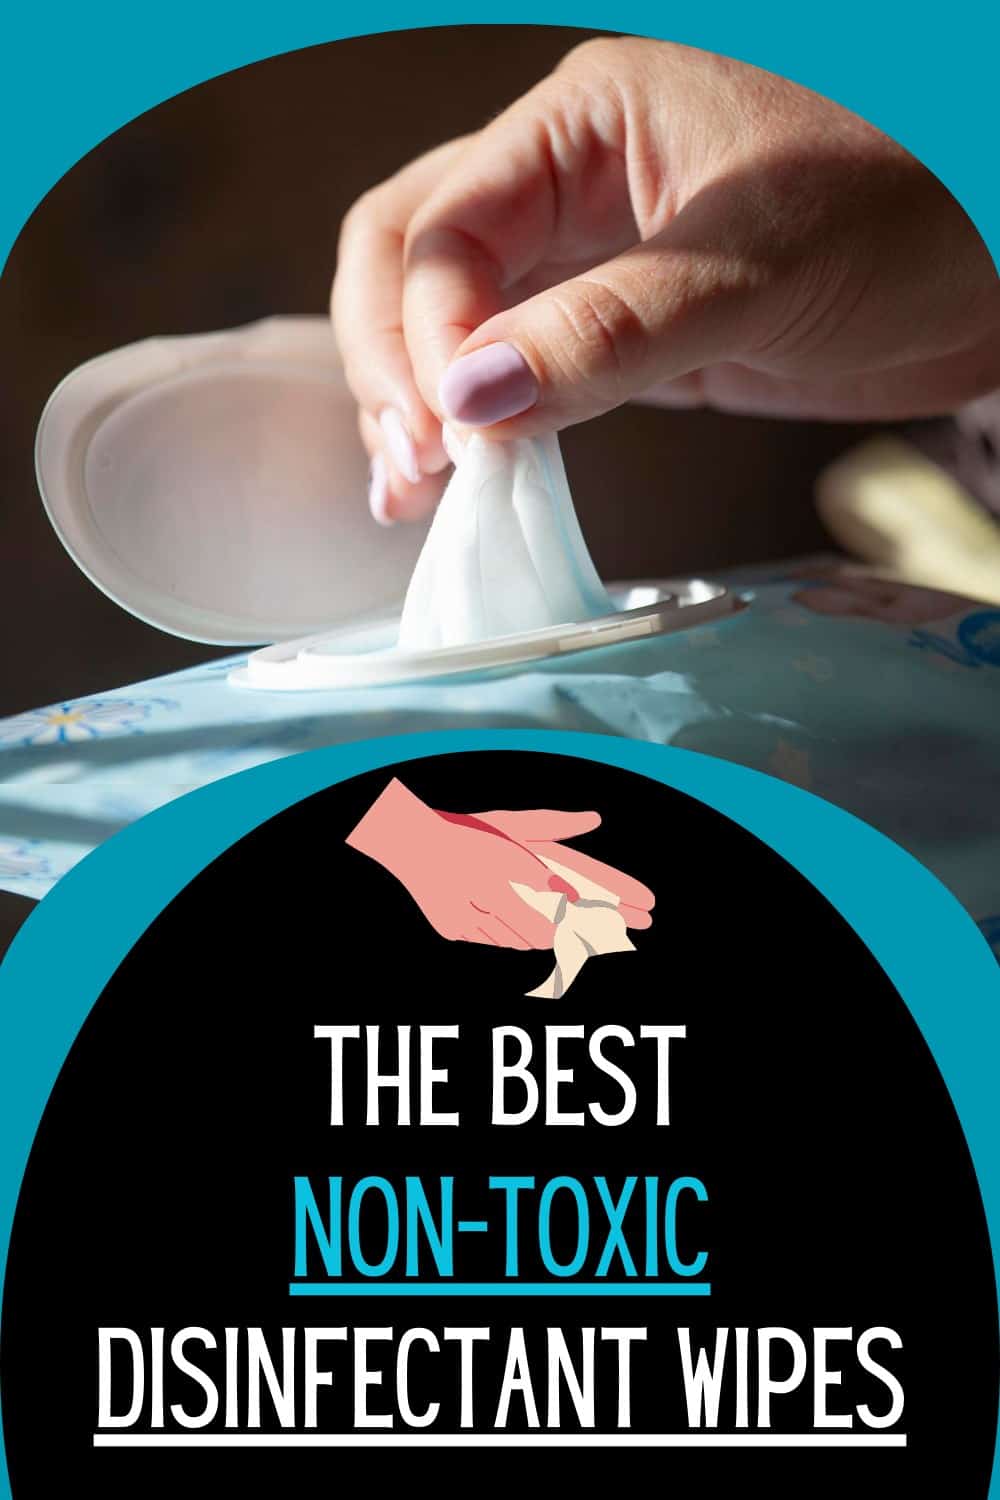 Best Disinfectant Wipes That Are Not Toxic